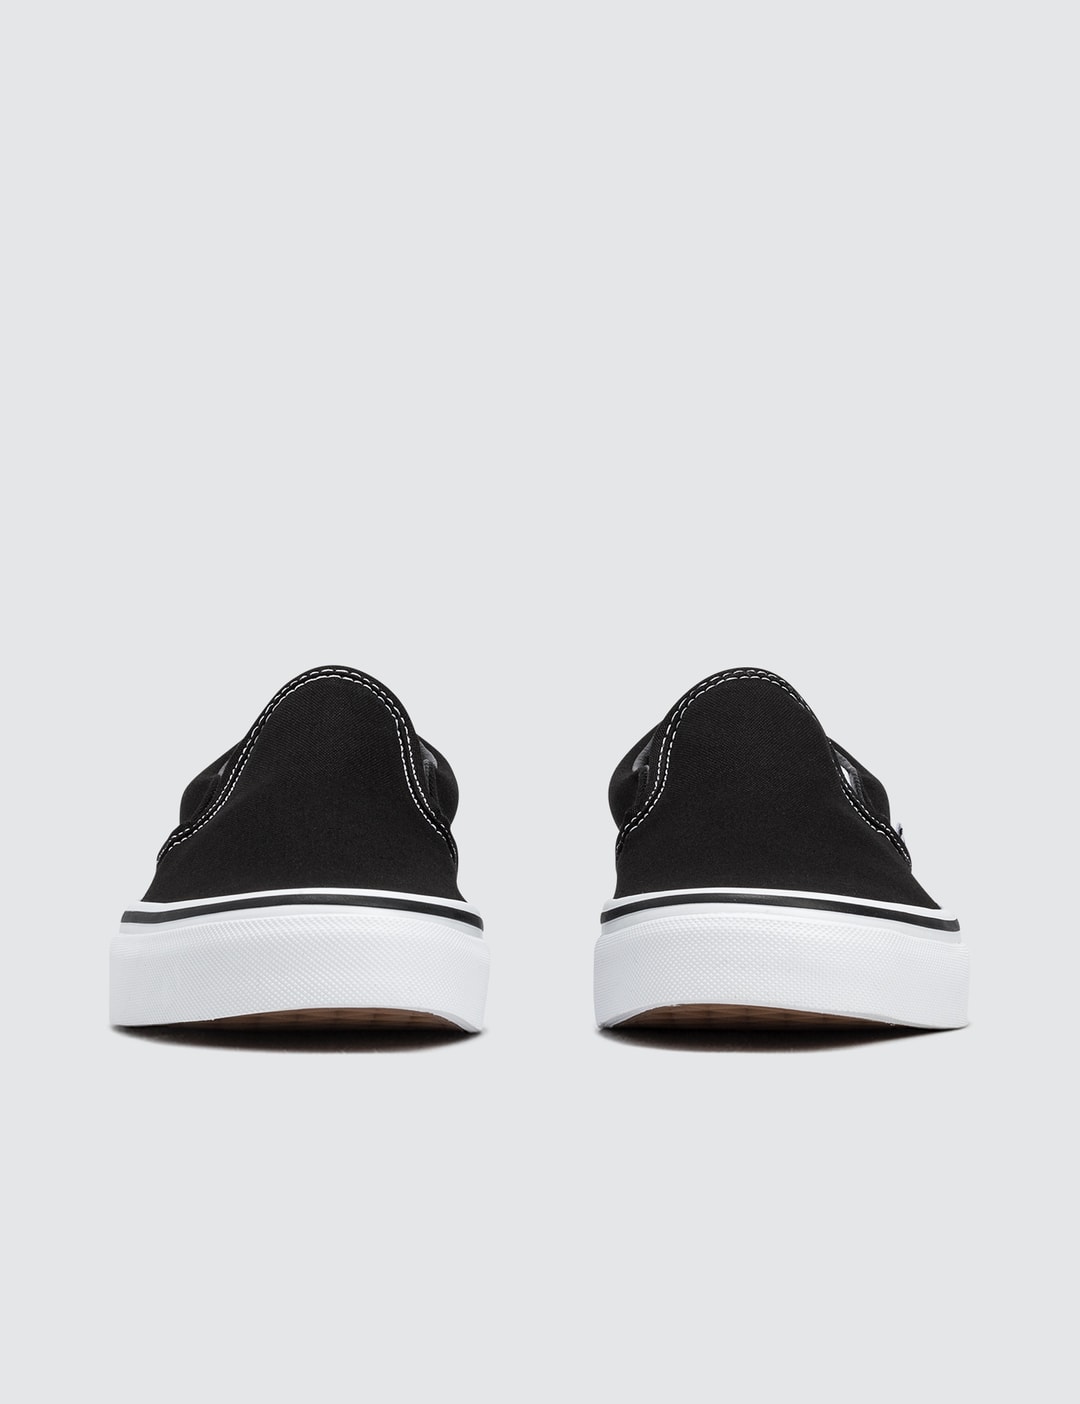 Vans - Classic Slip-on | HBX - Globally Curated Fashion and Lifestyle ...